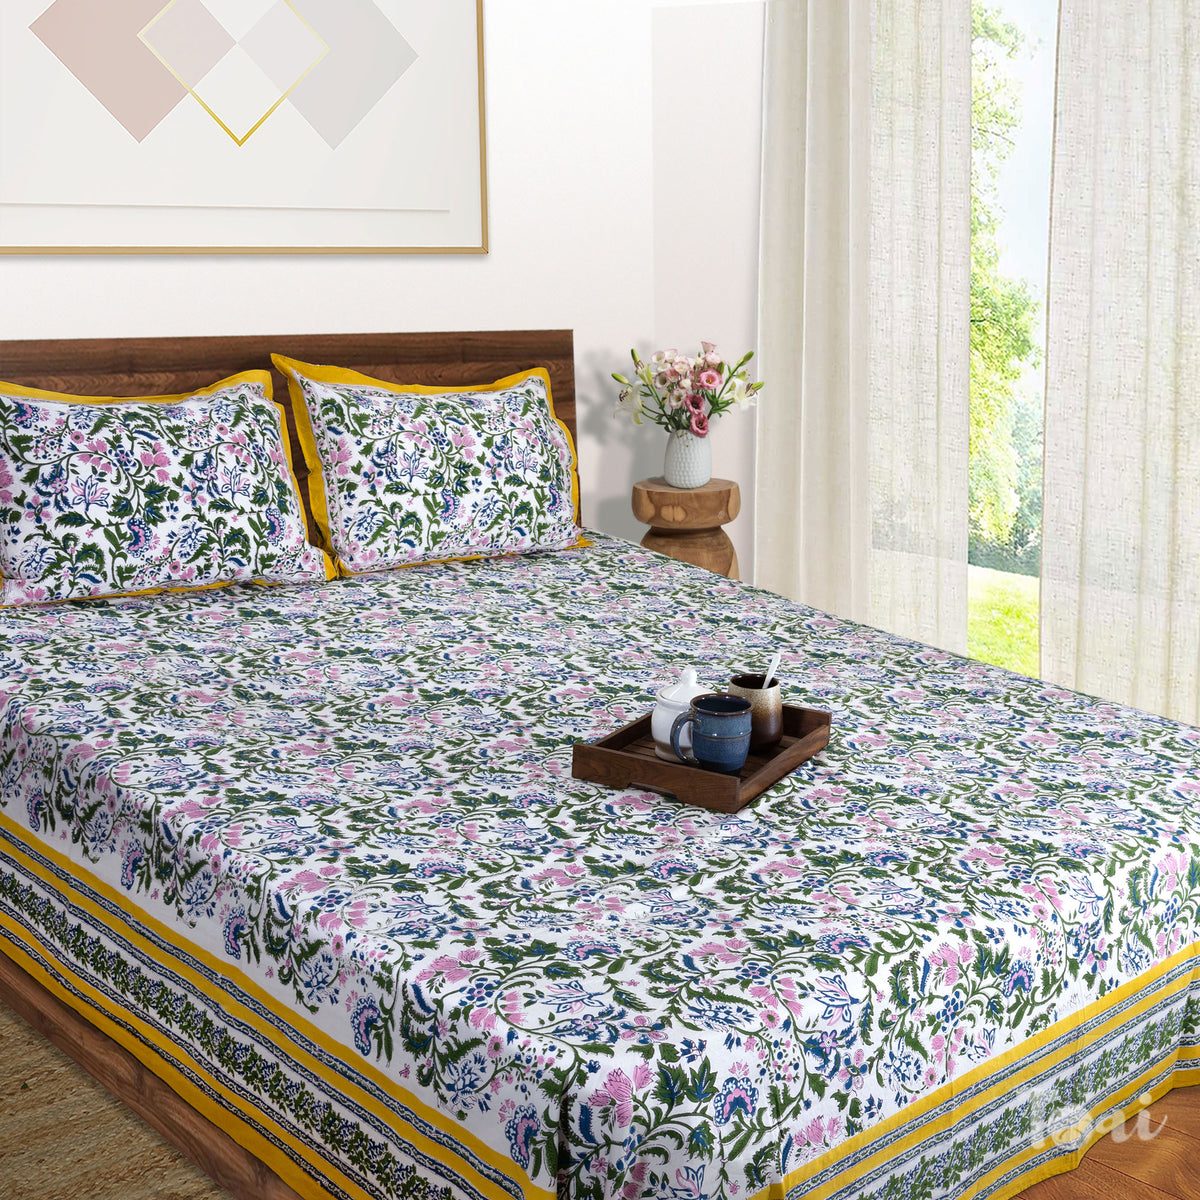 Florals on White |hand block printed bedsheet| Double bed: Queen size, King Size | 300 TC Premium Pure Cotton| Complementing pillow covers